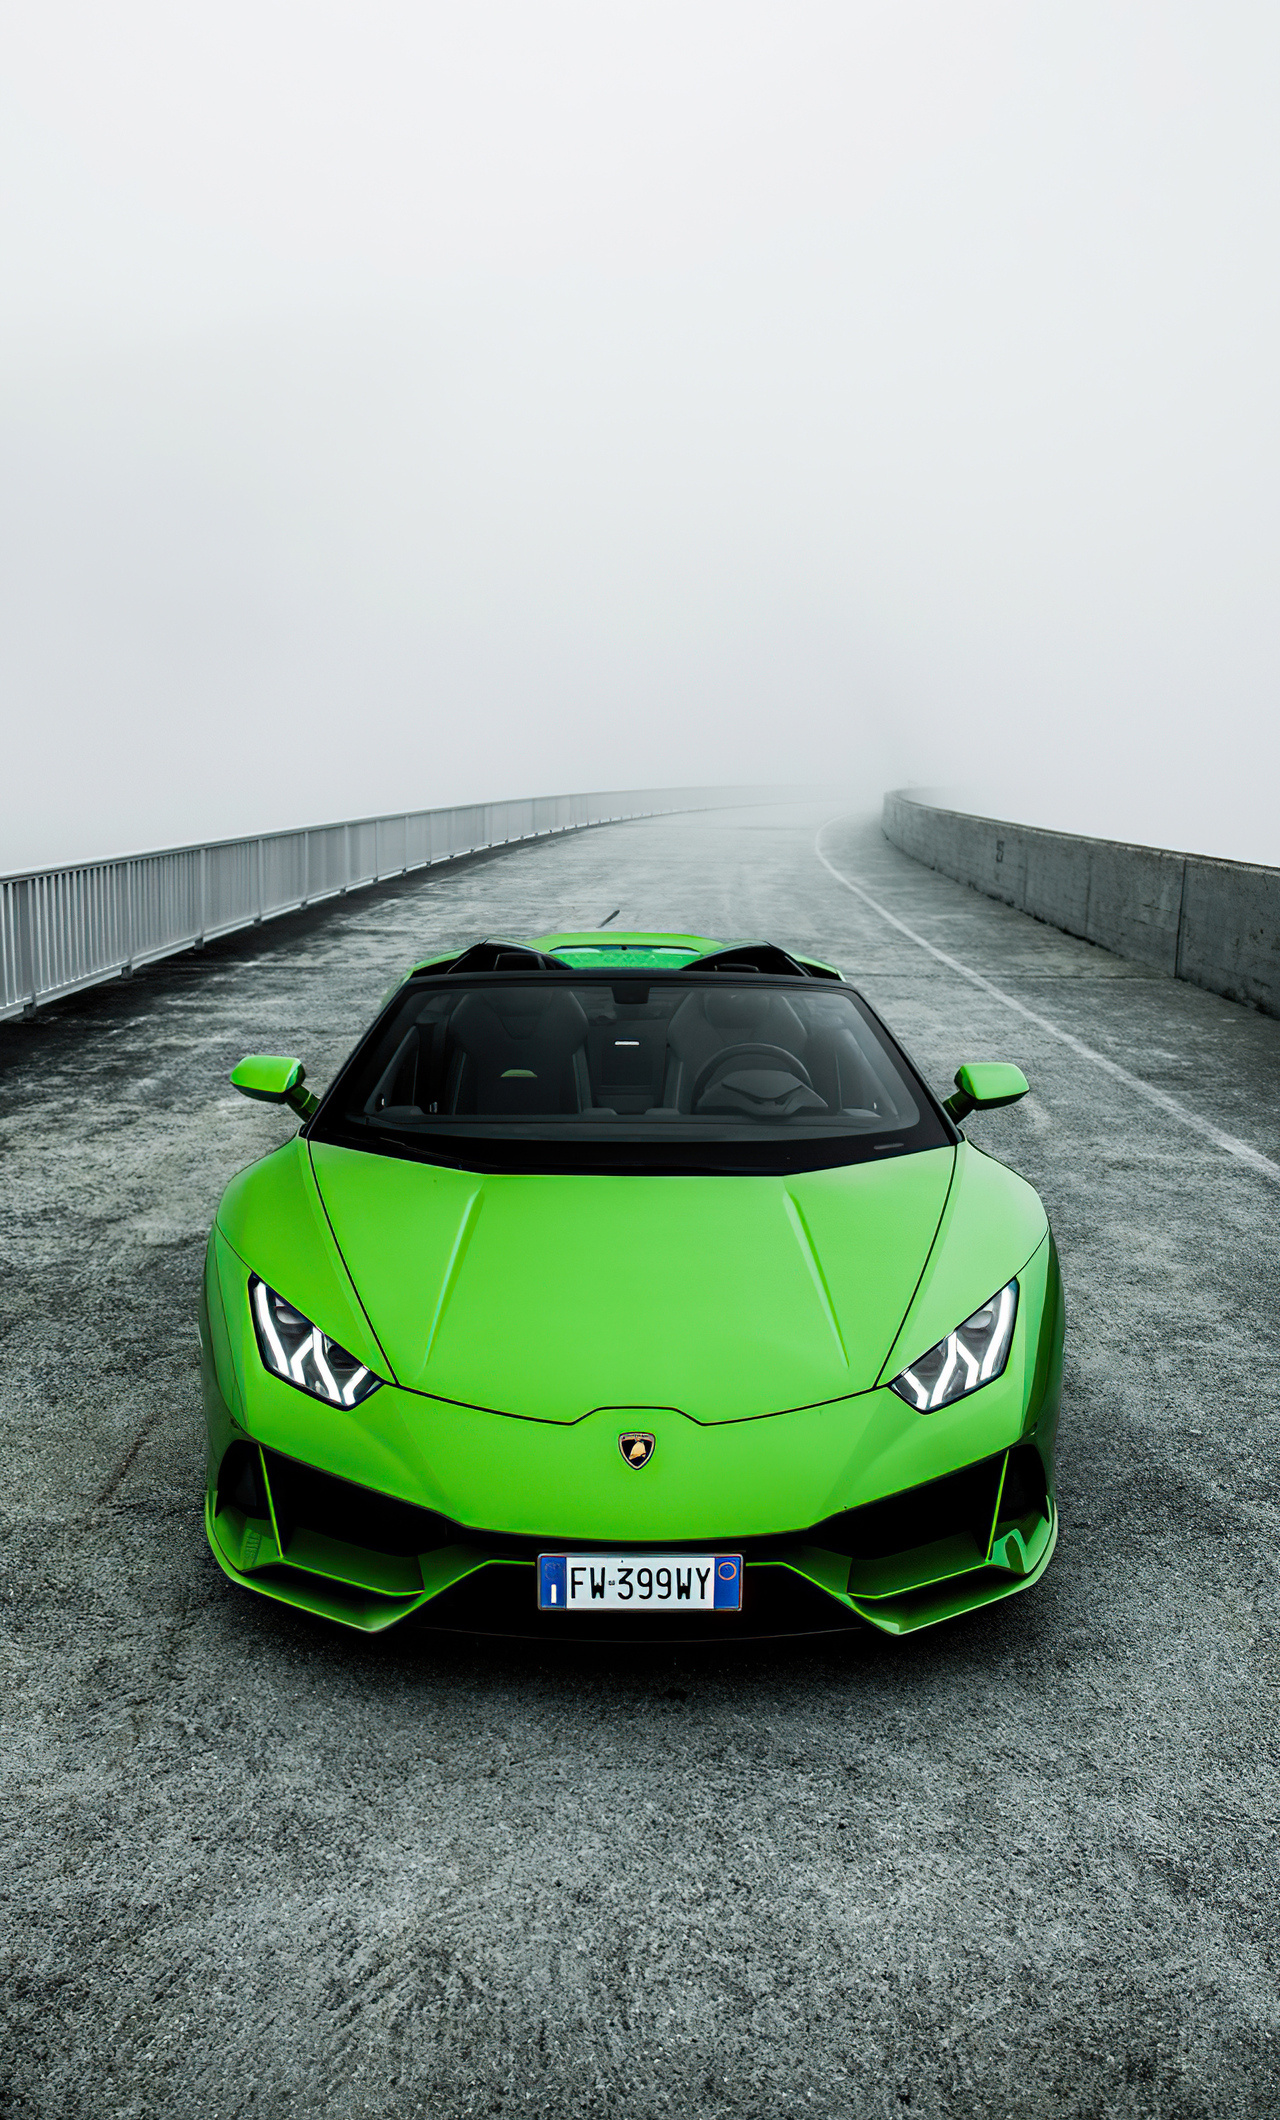 Huracan Evo Spyder wallpapers, iPhone 6 compatibility, HD 4K visuals, Perfect for mobile devices, 1280x2120 HD Phone